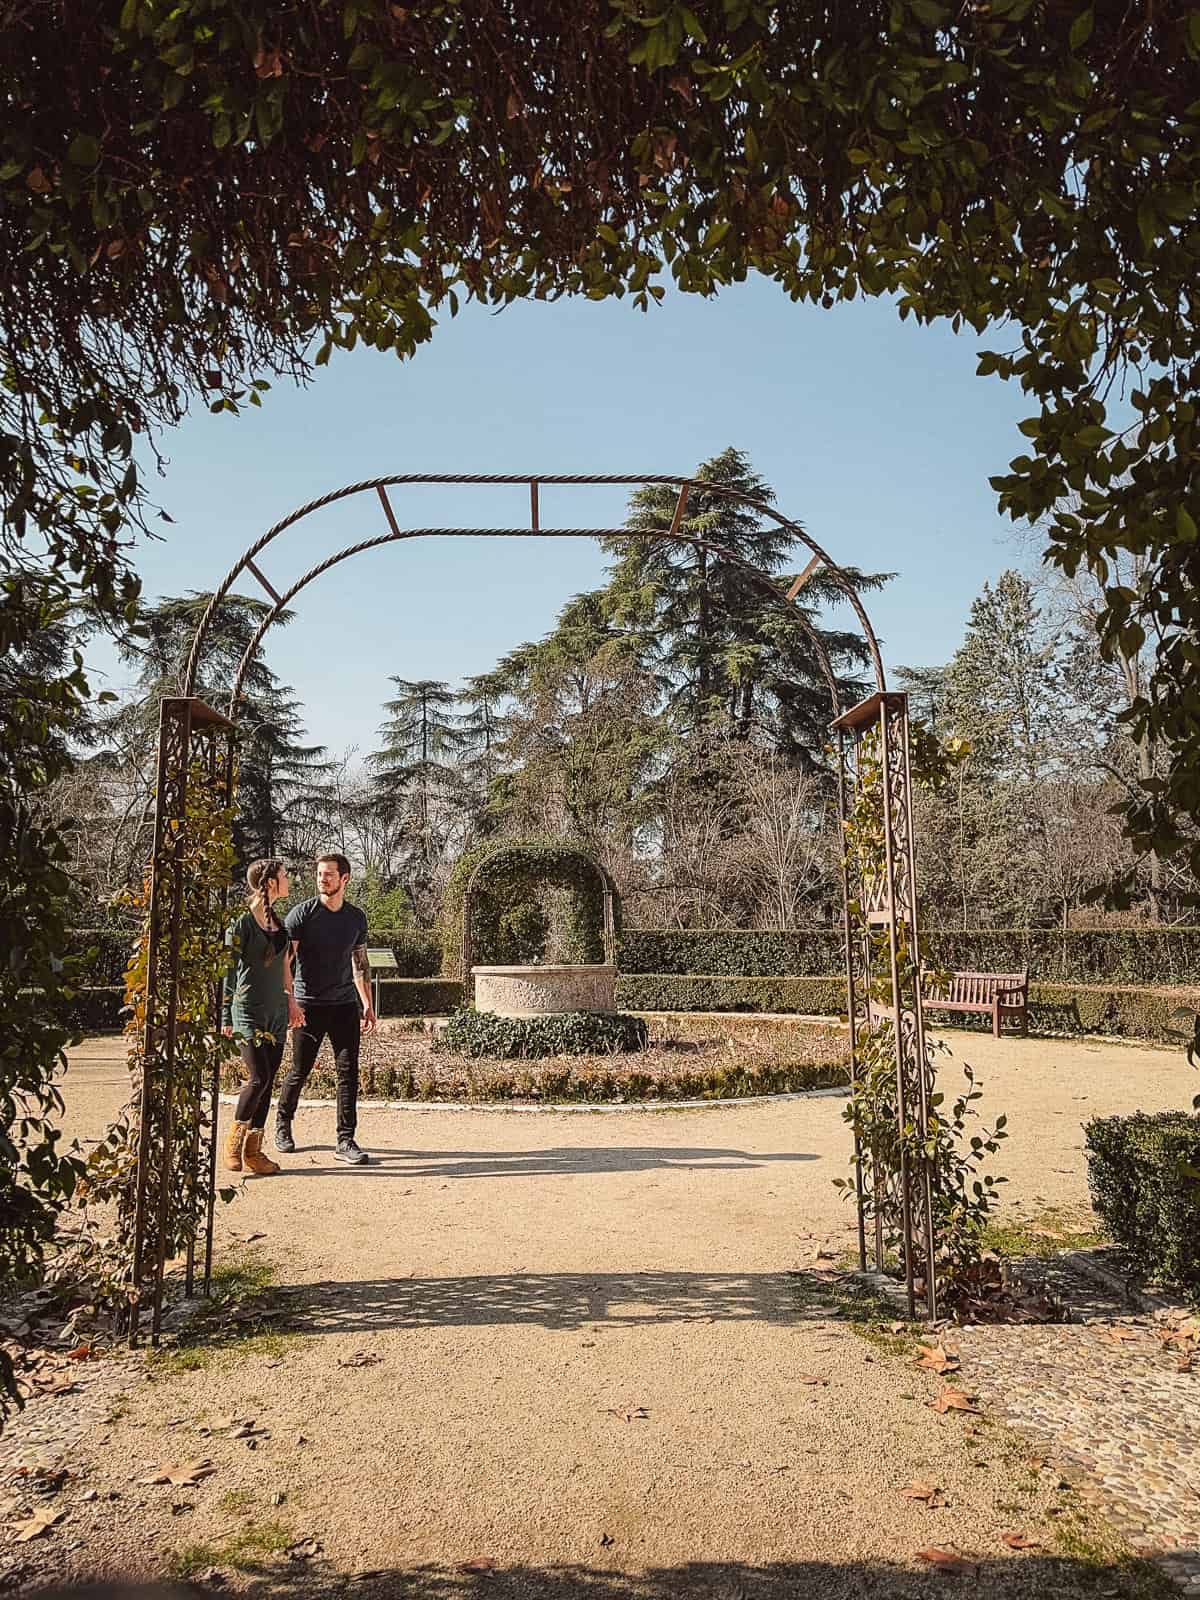 Two individuals walking under a leafy metal archway on a gravel pathway in the peaceful setting of Retiro Park, Madrid, with topiary hedges and tall trees framing the scene on a sunny day.